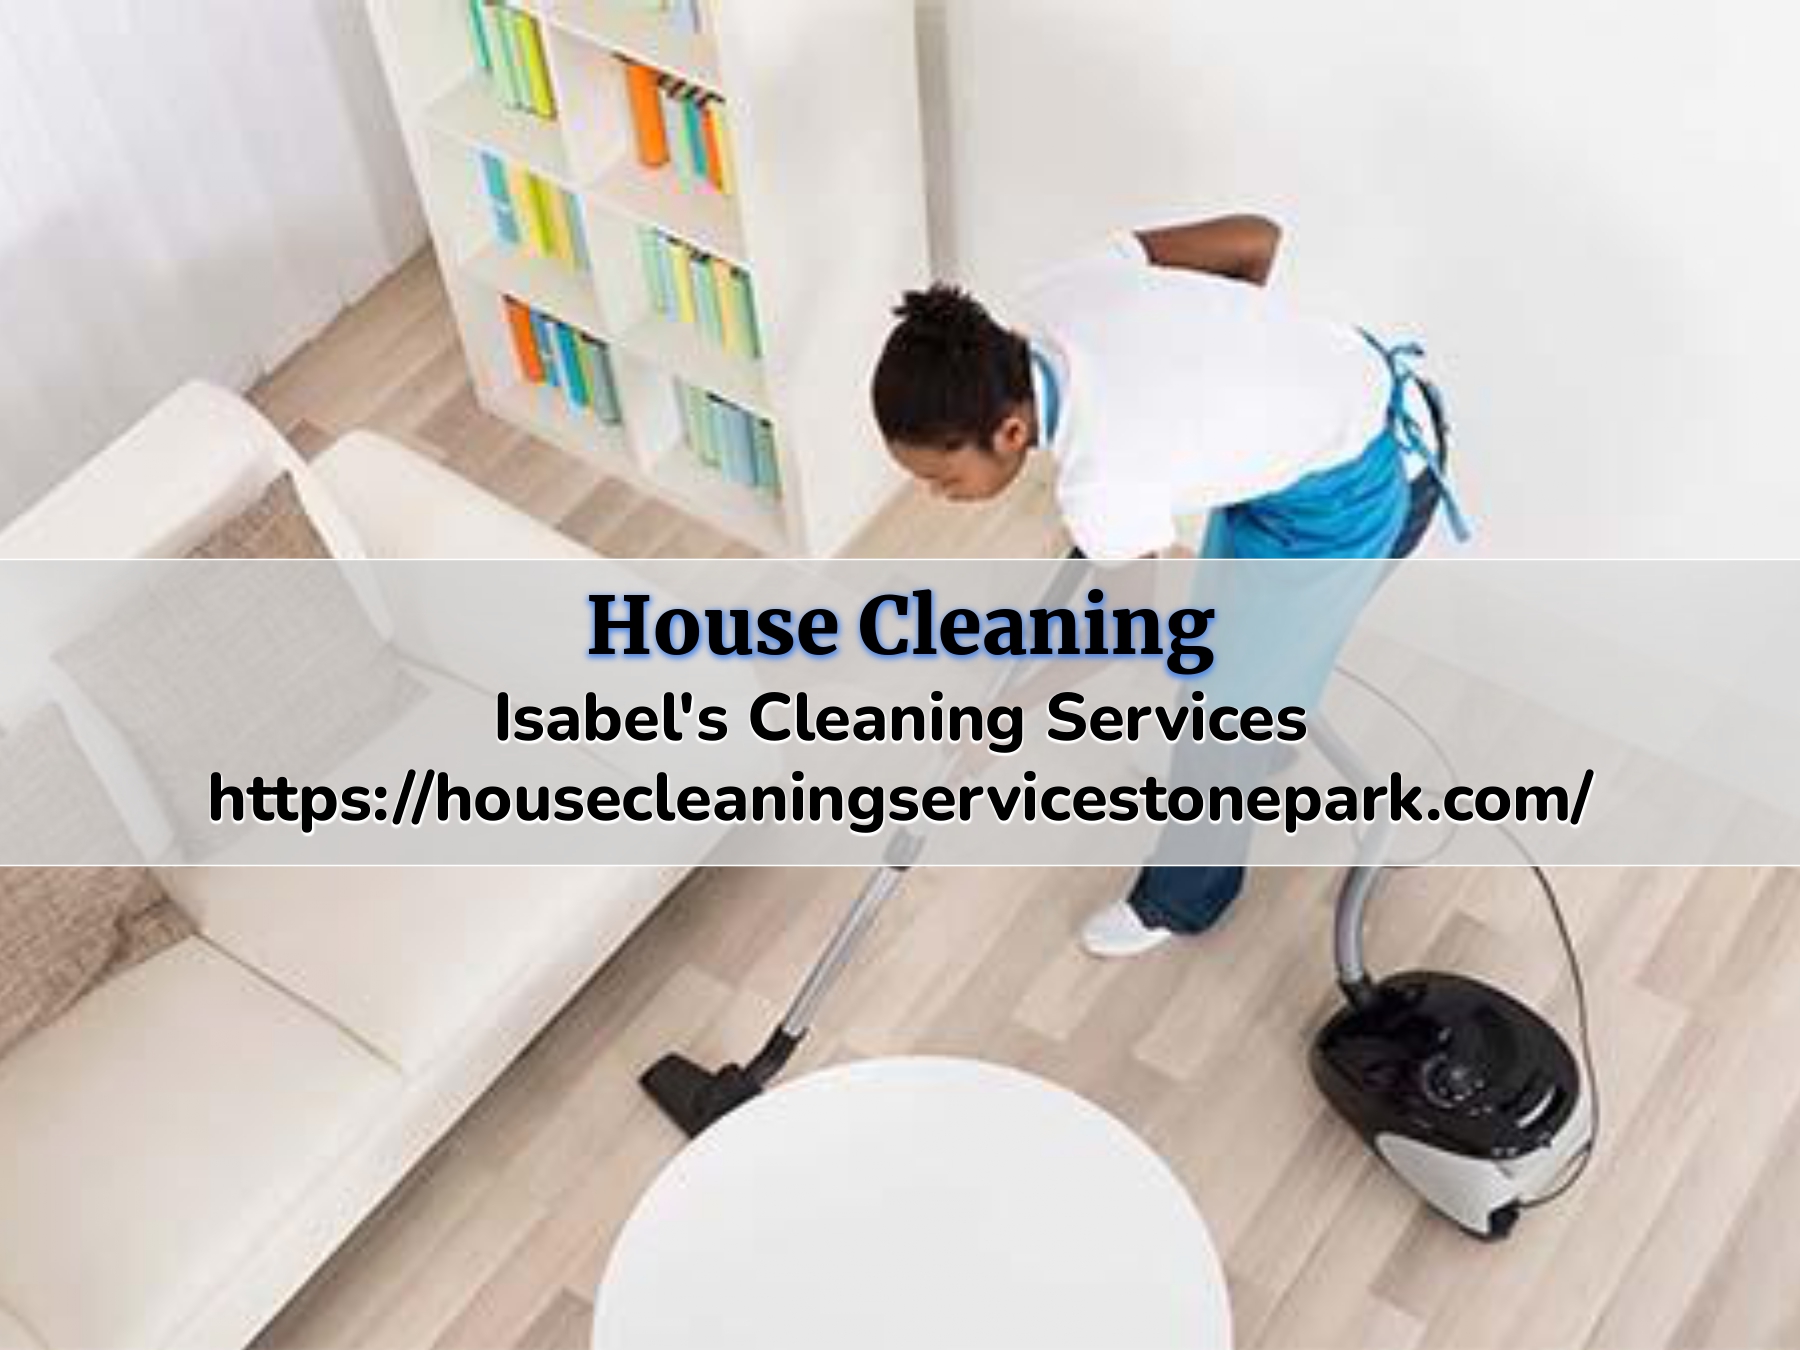 Isabel's Cleaning Services